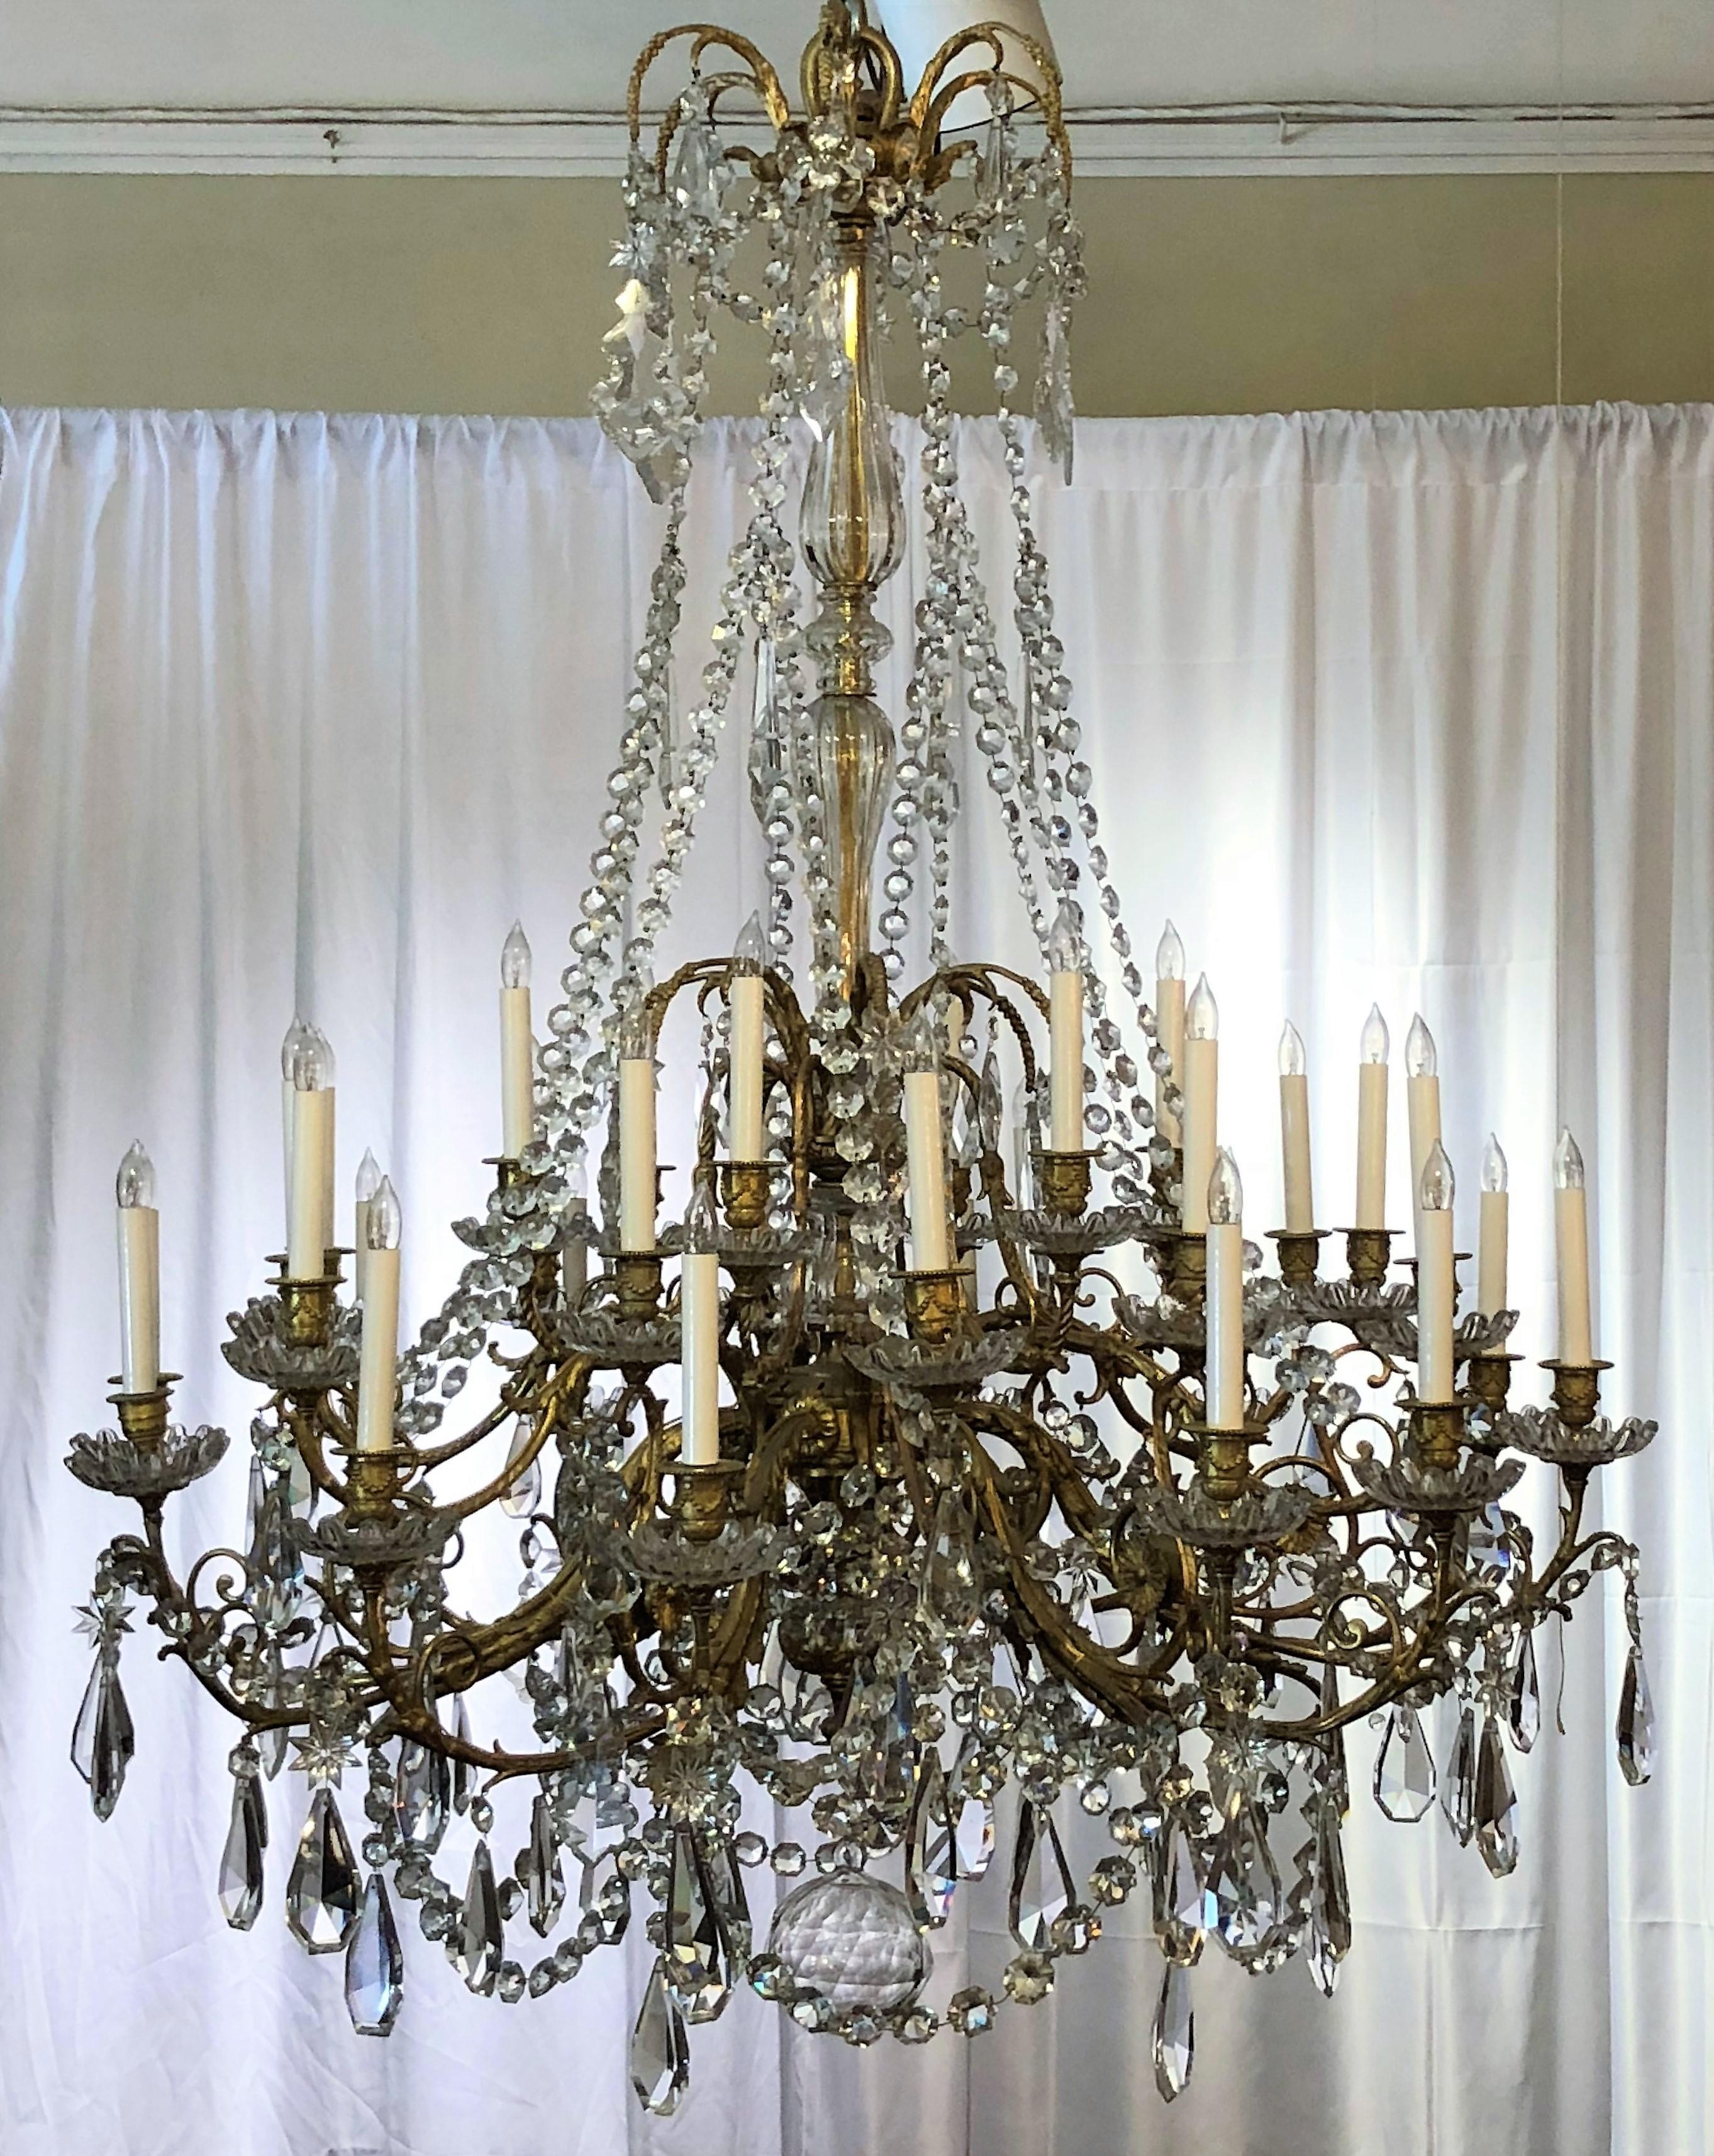 Antique French baccarat crystal and bronze dore 30-light chandelier.